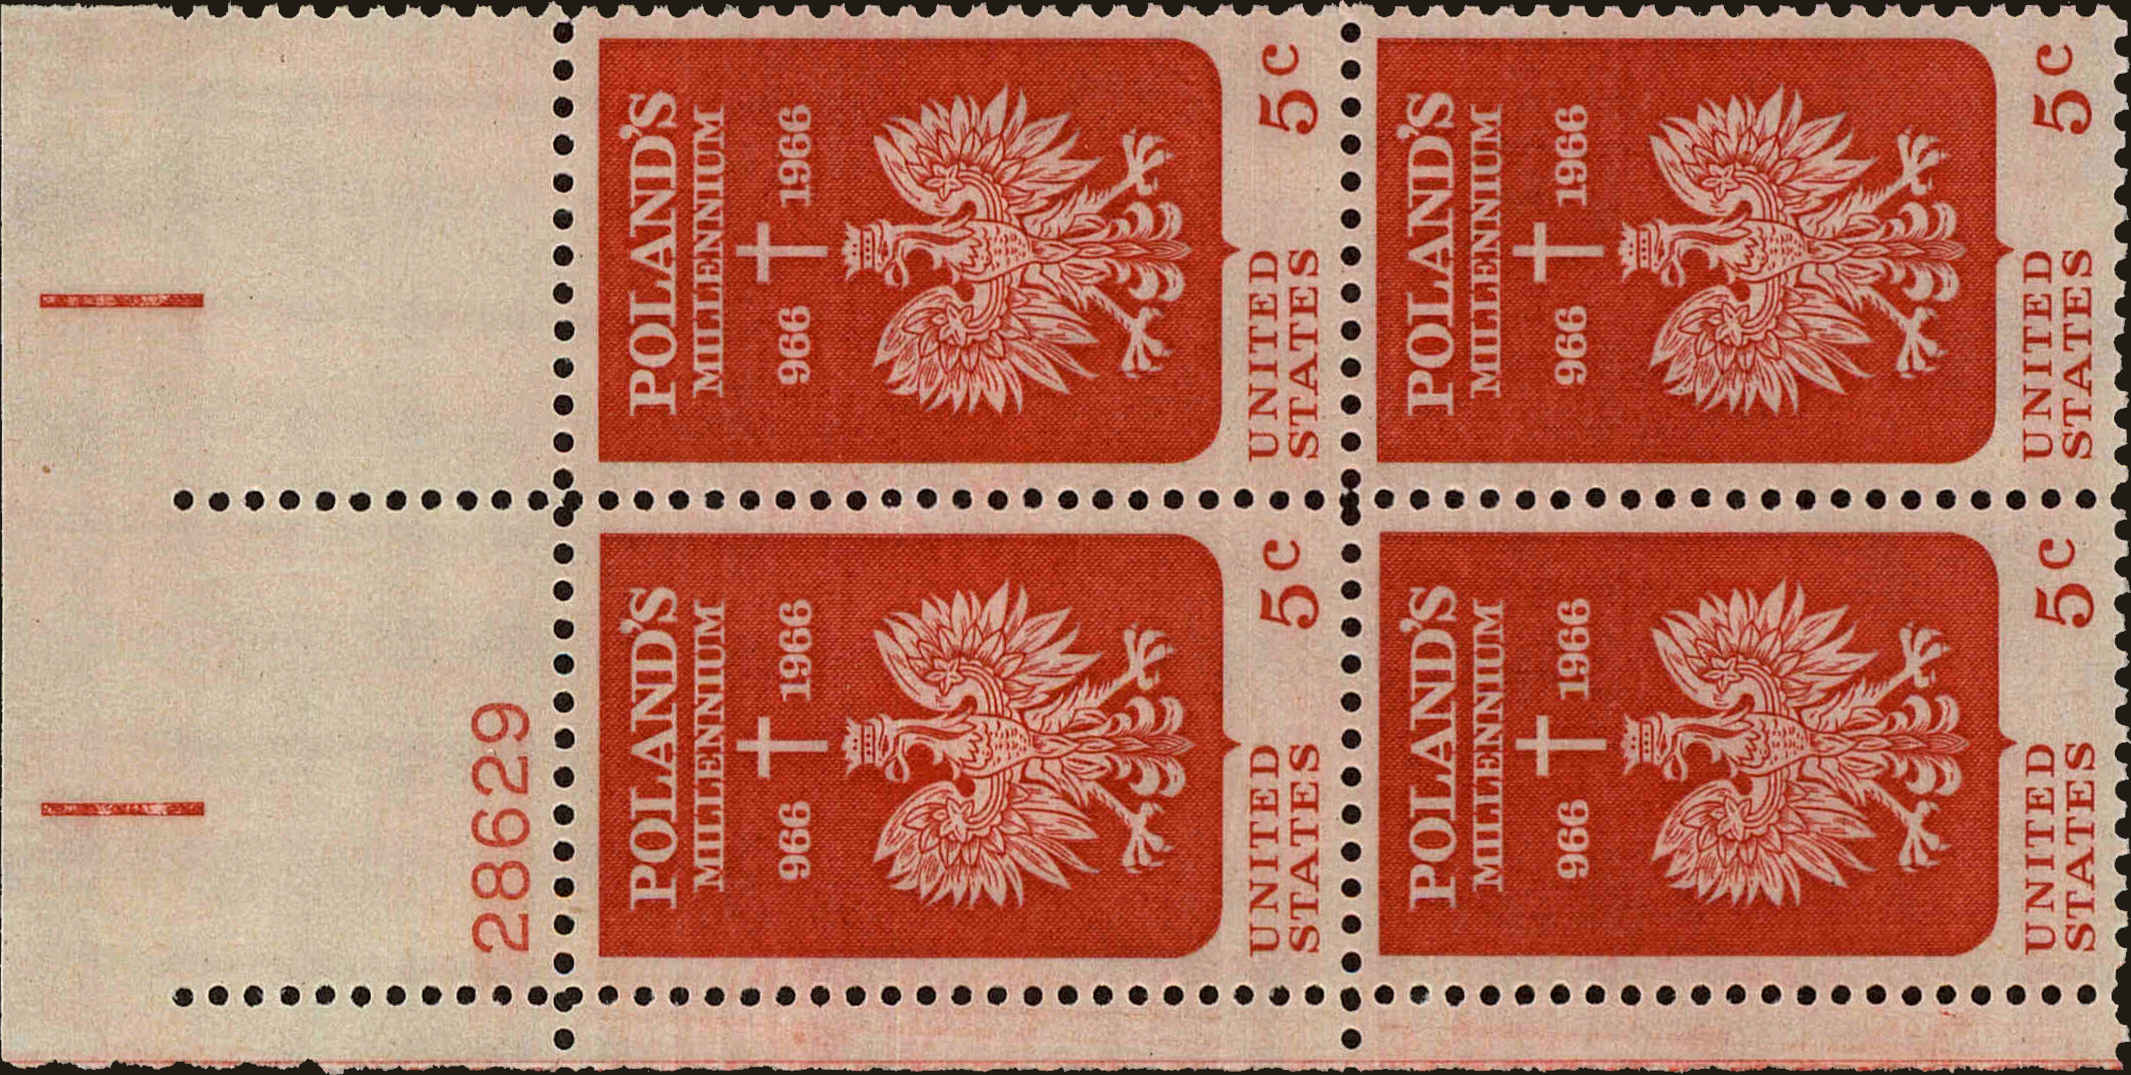 Front view of United States 1313 collectors stamp